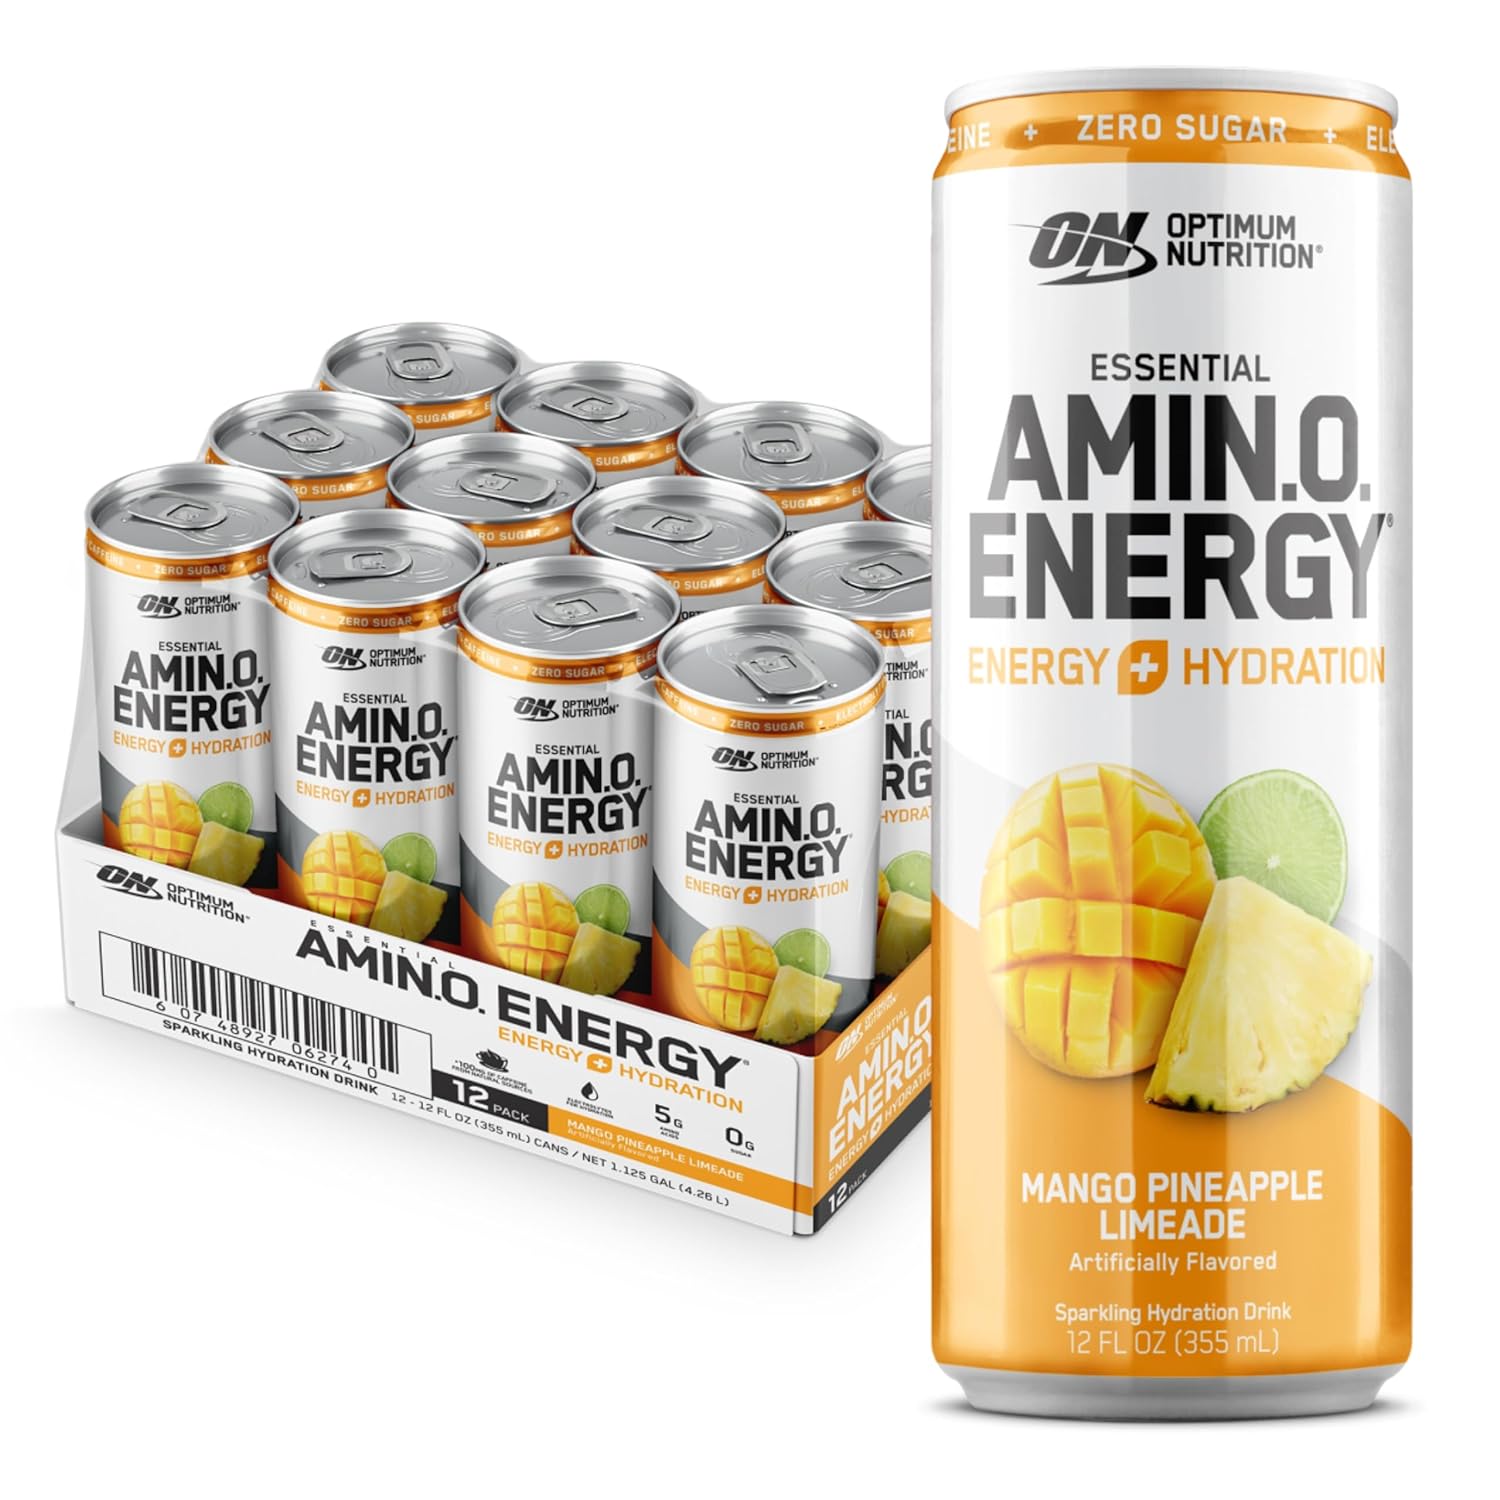 12-Pack 12-Oz Optimum Nutrition Amino Energy Sparkling Hydration Drink (Mango Pineapple Limeade) $8.49 w/ S&S + Free Shipping w/ Prime or Orders $35+